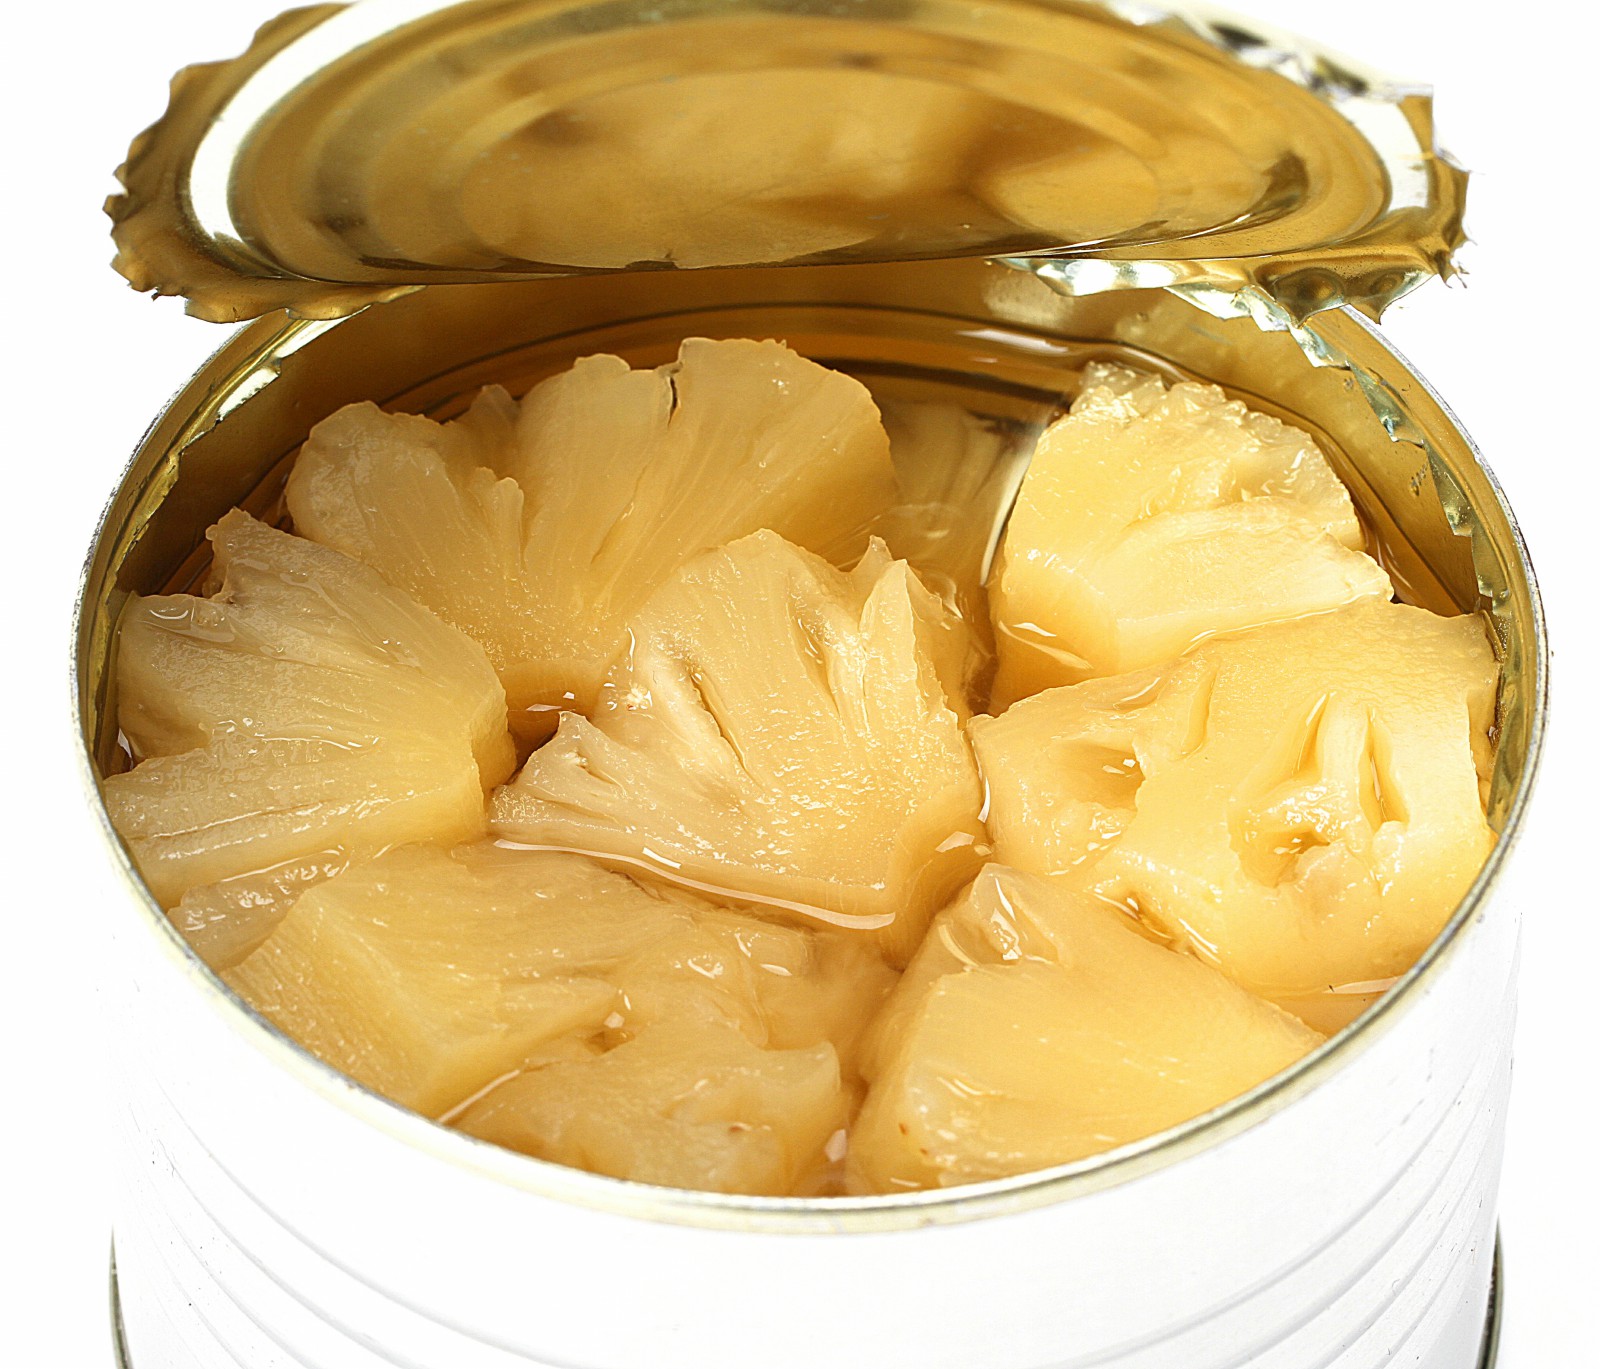 Canned pineapple pieces